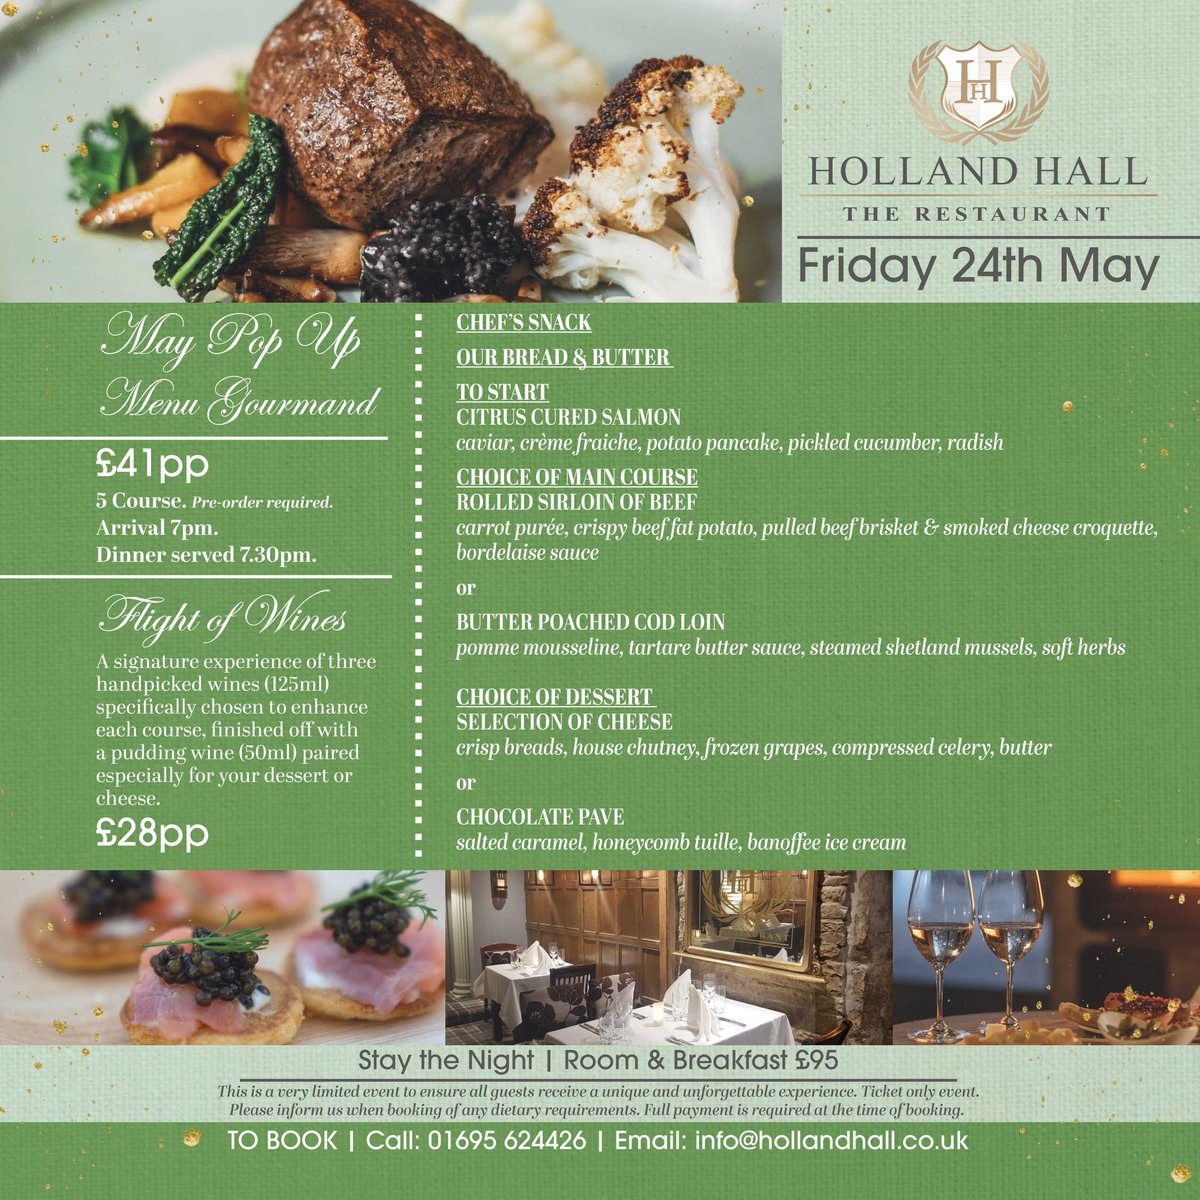 💚 Holland Hall presents May Pop Up – Fine Dining at The Restaurant at Holland Hall. Friday 24th May – 5 Course - £41pp. 

😴 Stay the Night - Room & Breakfast £95

📖 To Book | Call: 01695 624426 | Email: info@hollandhall.co.uk 

#finedining #finefood
#FineDiningExperience